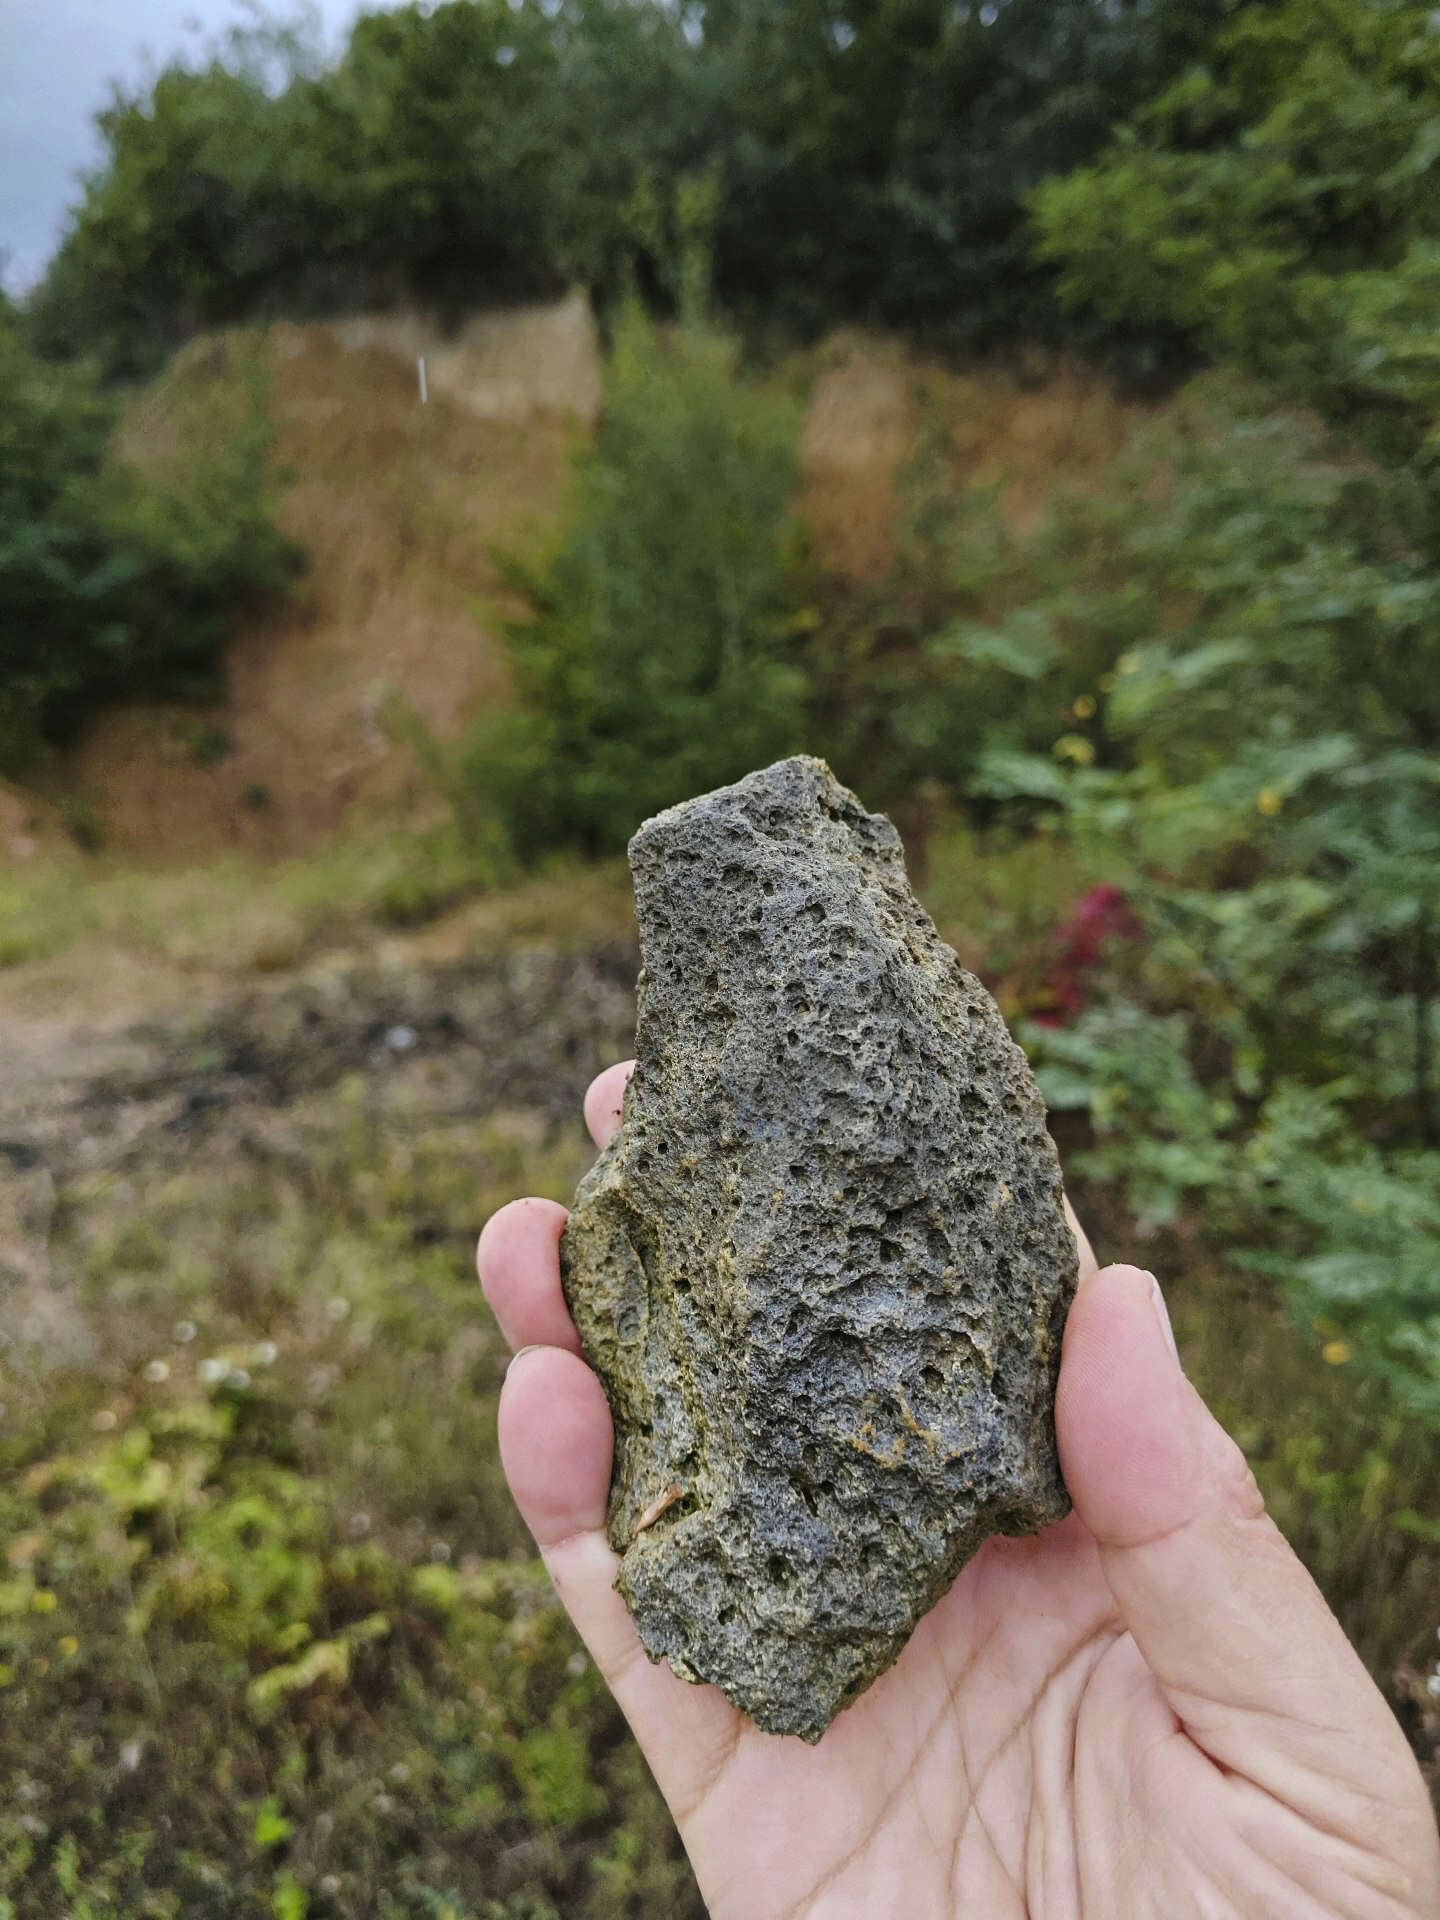 This photo provided by researcher Roman Garba shows a notched stone tool made from local volcanic raw material (glassy dacite) at the Korolevo I archaeological site in western Ukraine in August 2023. Stone tools found in the area are the earliest evidence of early human presence in Europe, dating back to 1.4 million years ago, according to research published in the journal Nature on Wednesday, March 6, 2024. (Roman Garba via AP)